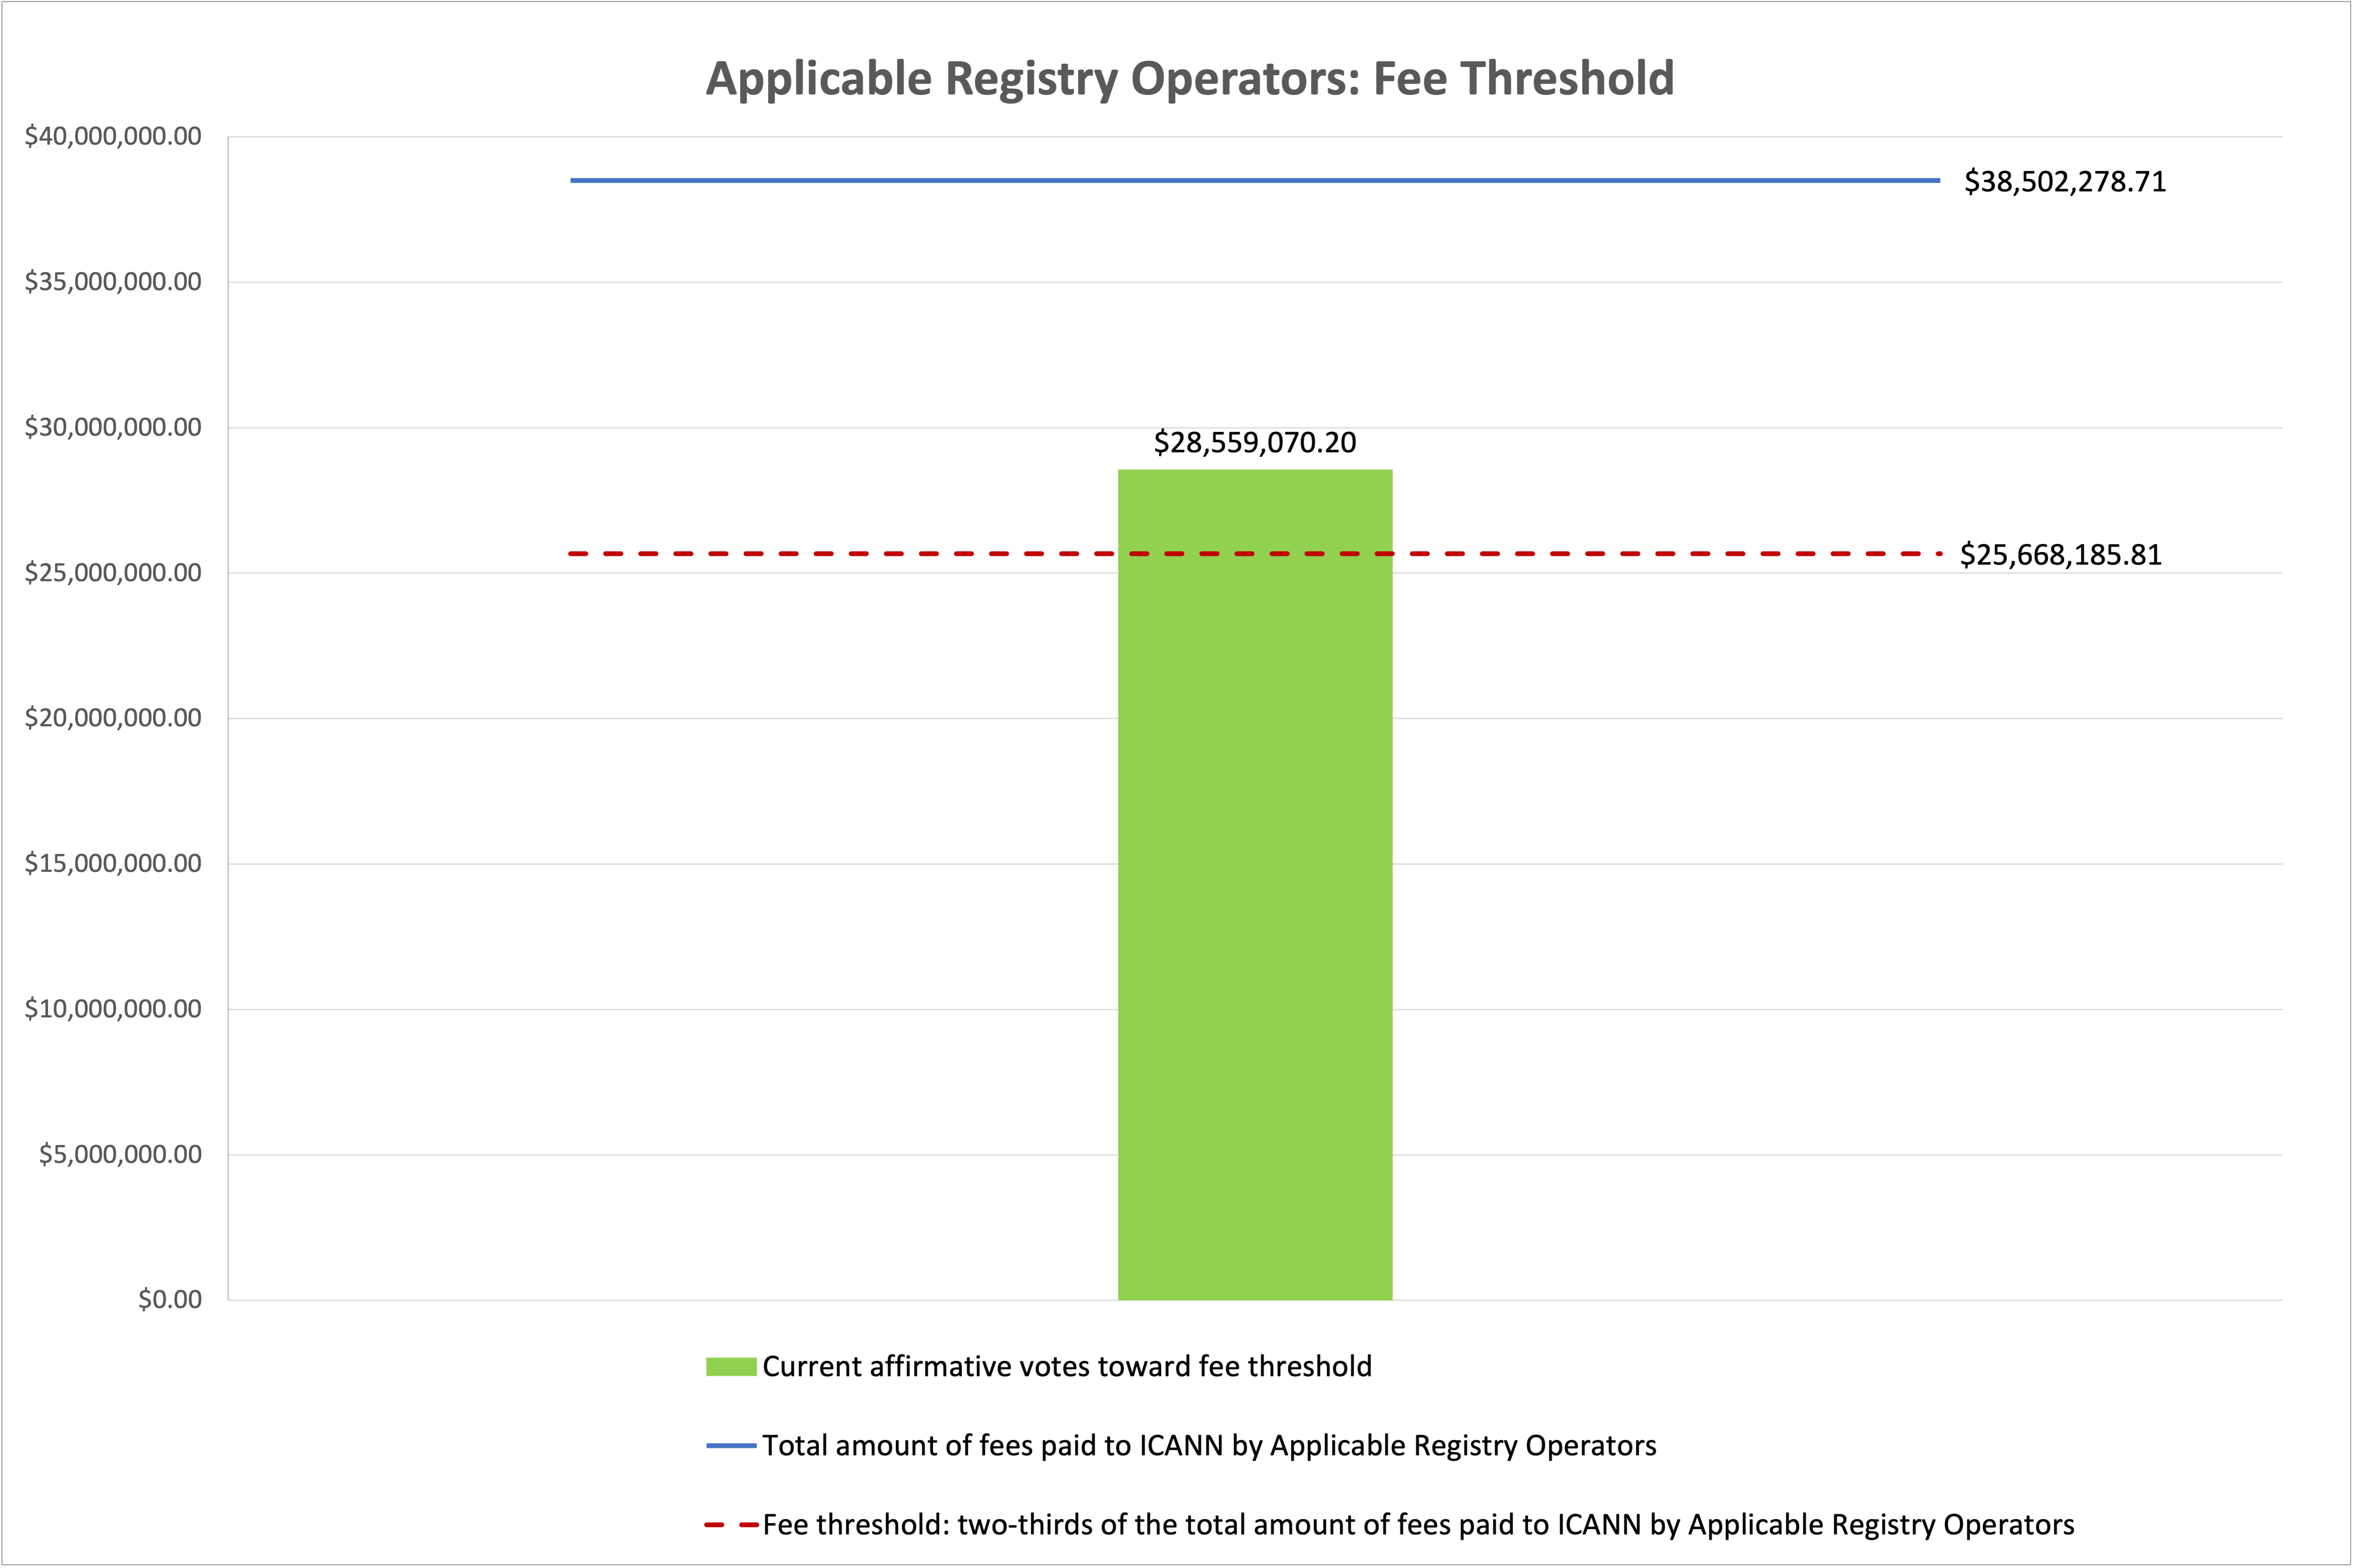 Bar chart of the progress of the vote towards the affirmative approval of the fee threshold for Applicable Registry Operators. Fee approval threshold of $25,668,185.81, with current affirmative votes toward the fee threshold at $28,559,070.20